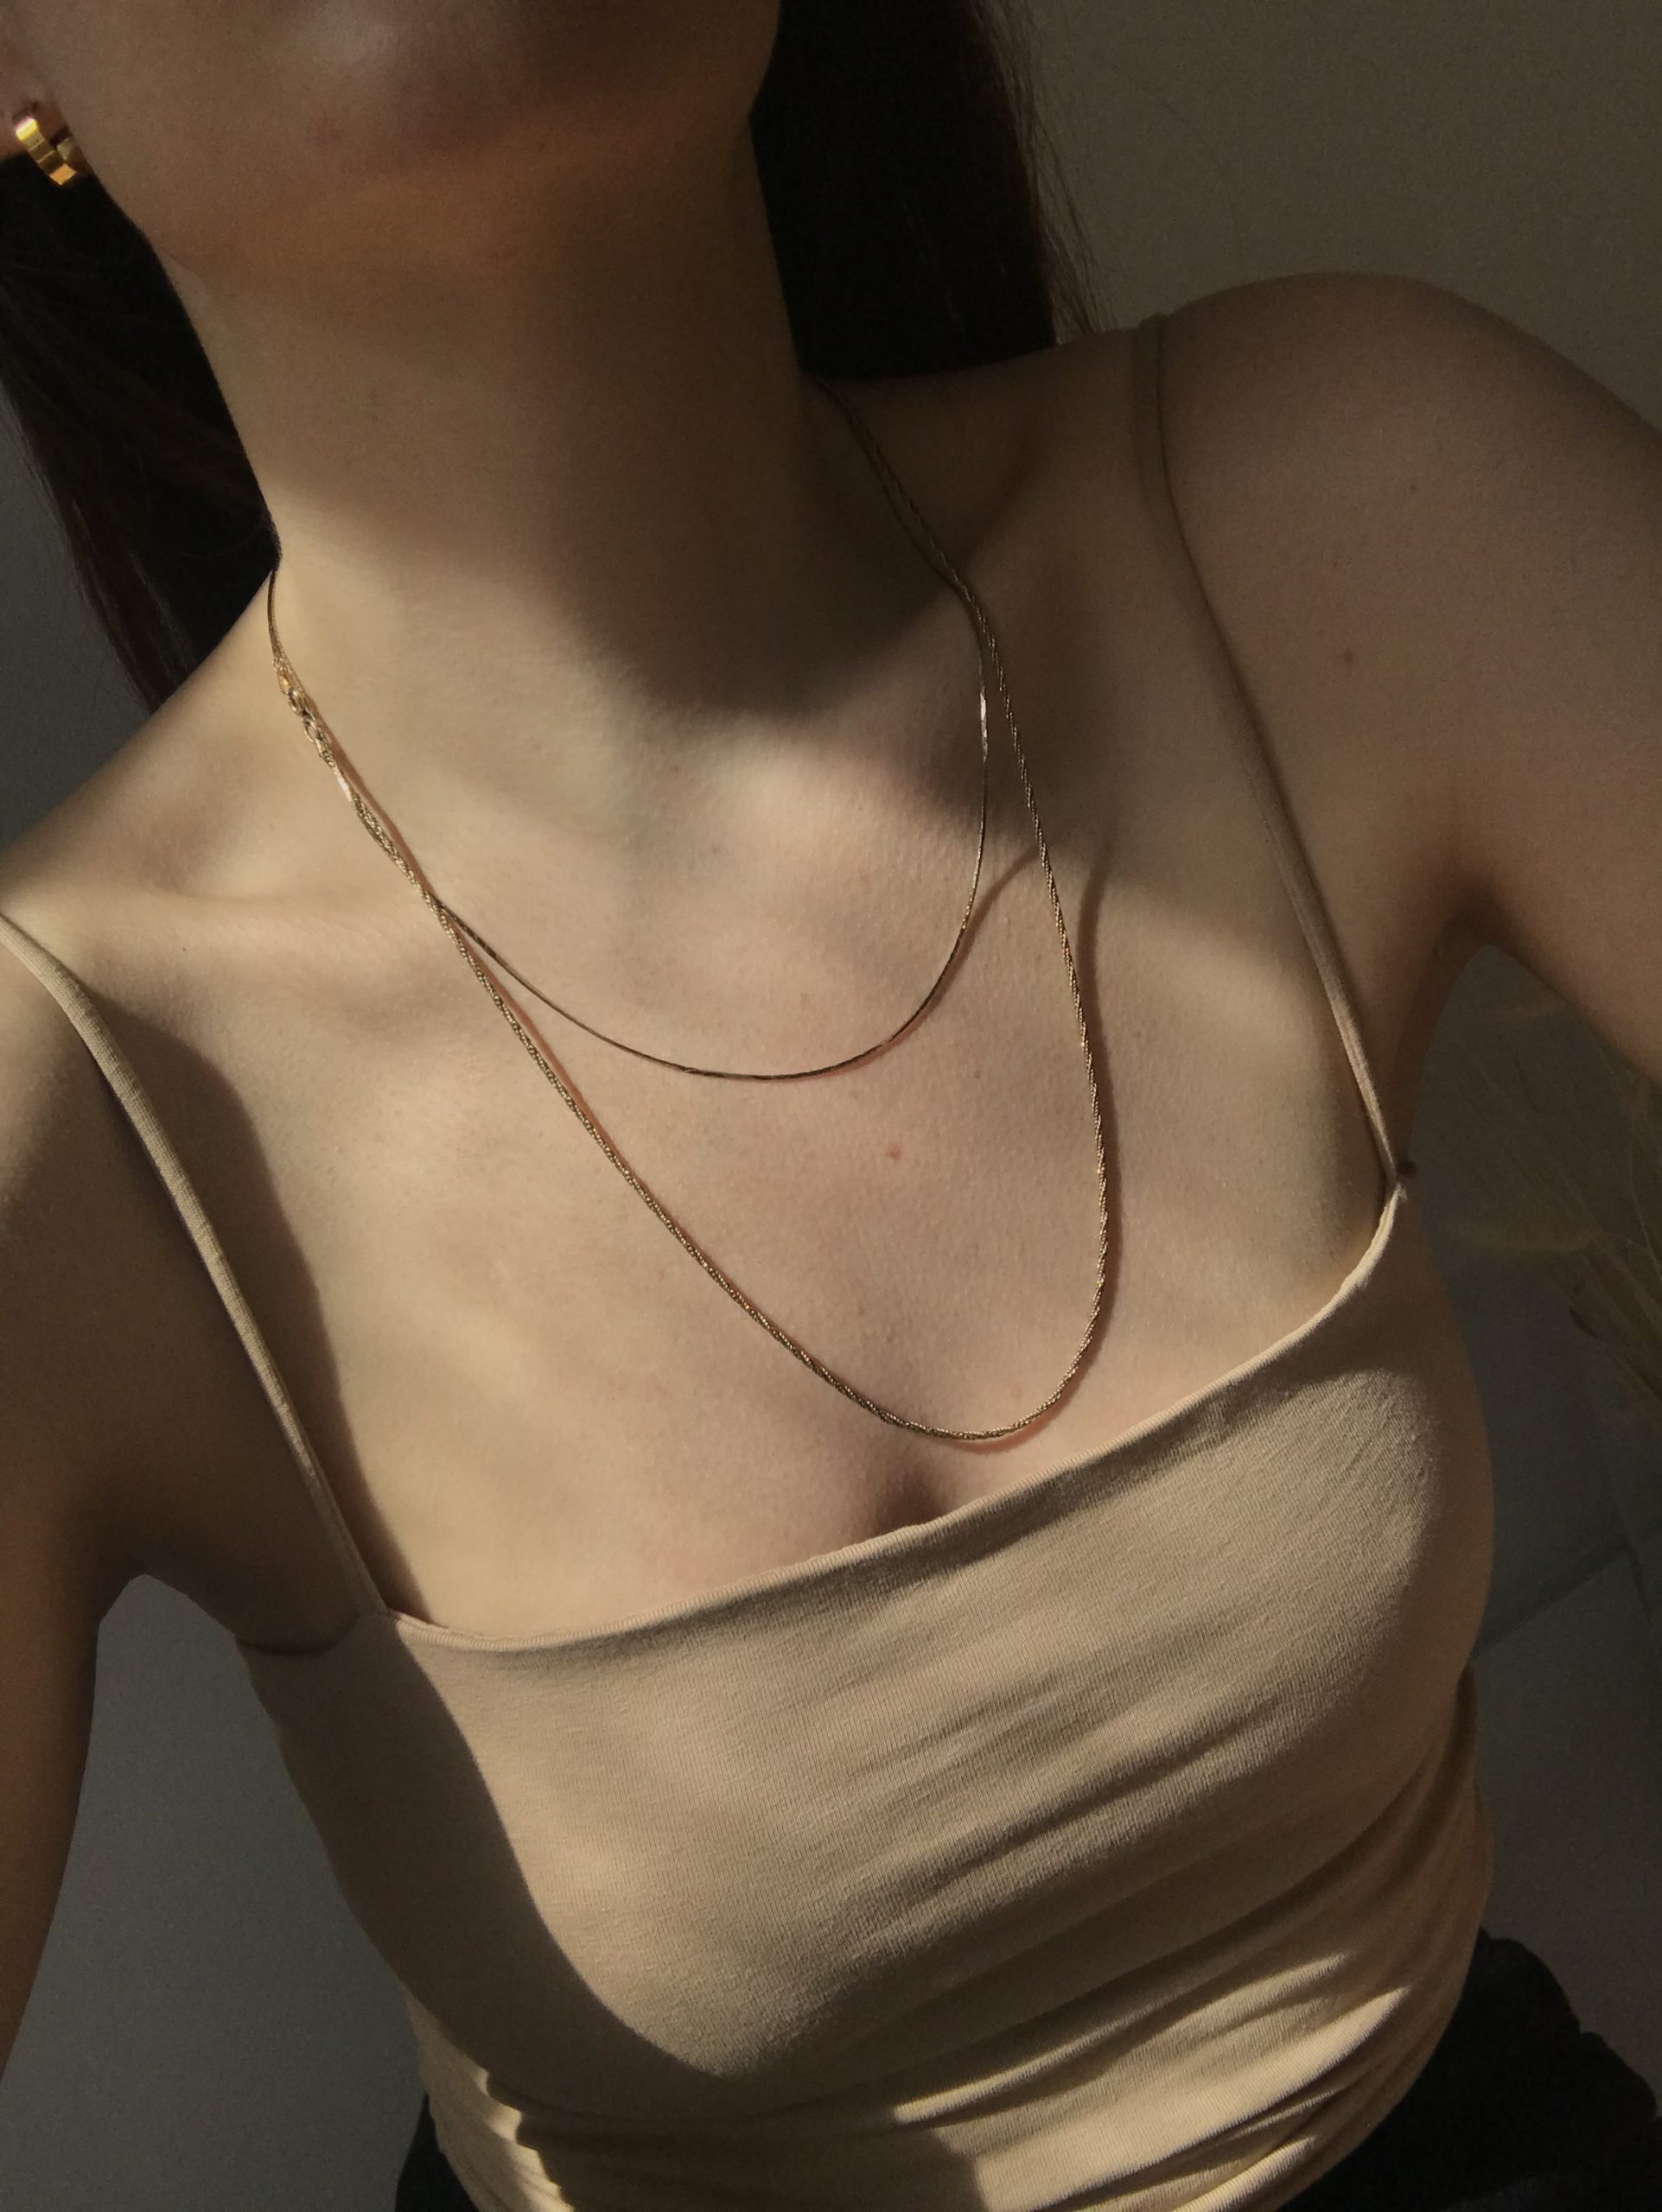 Gold Jewelry, minimalist fashion, light shadows, style, simple outfit, singlet top, beige aesthetic vintage gold door handles, european interior design inspo, historic building, white french doors | RG Daily Blog